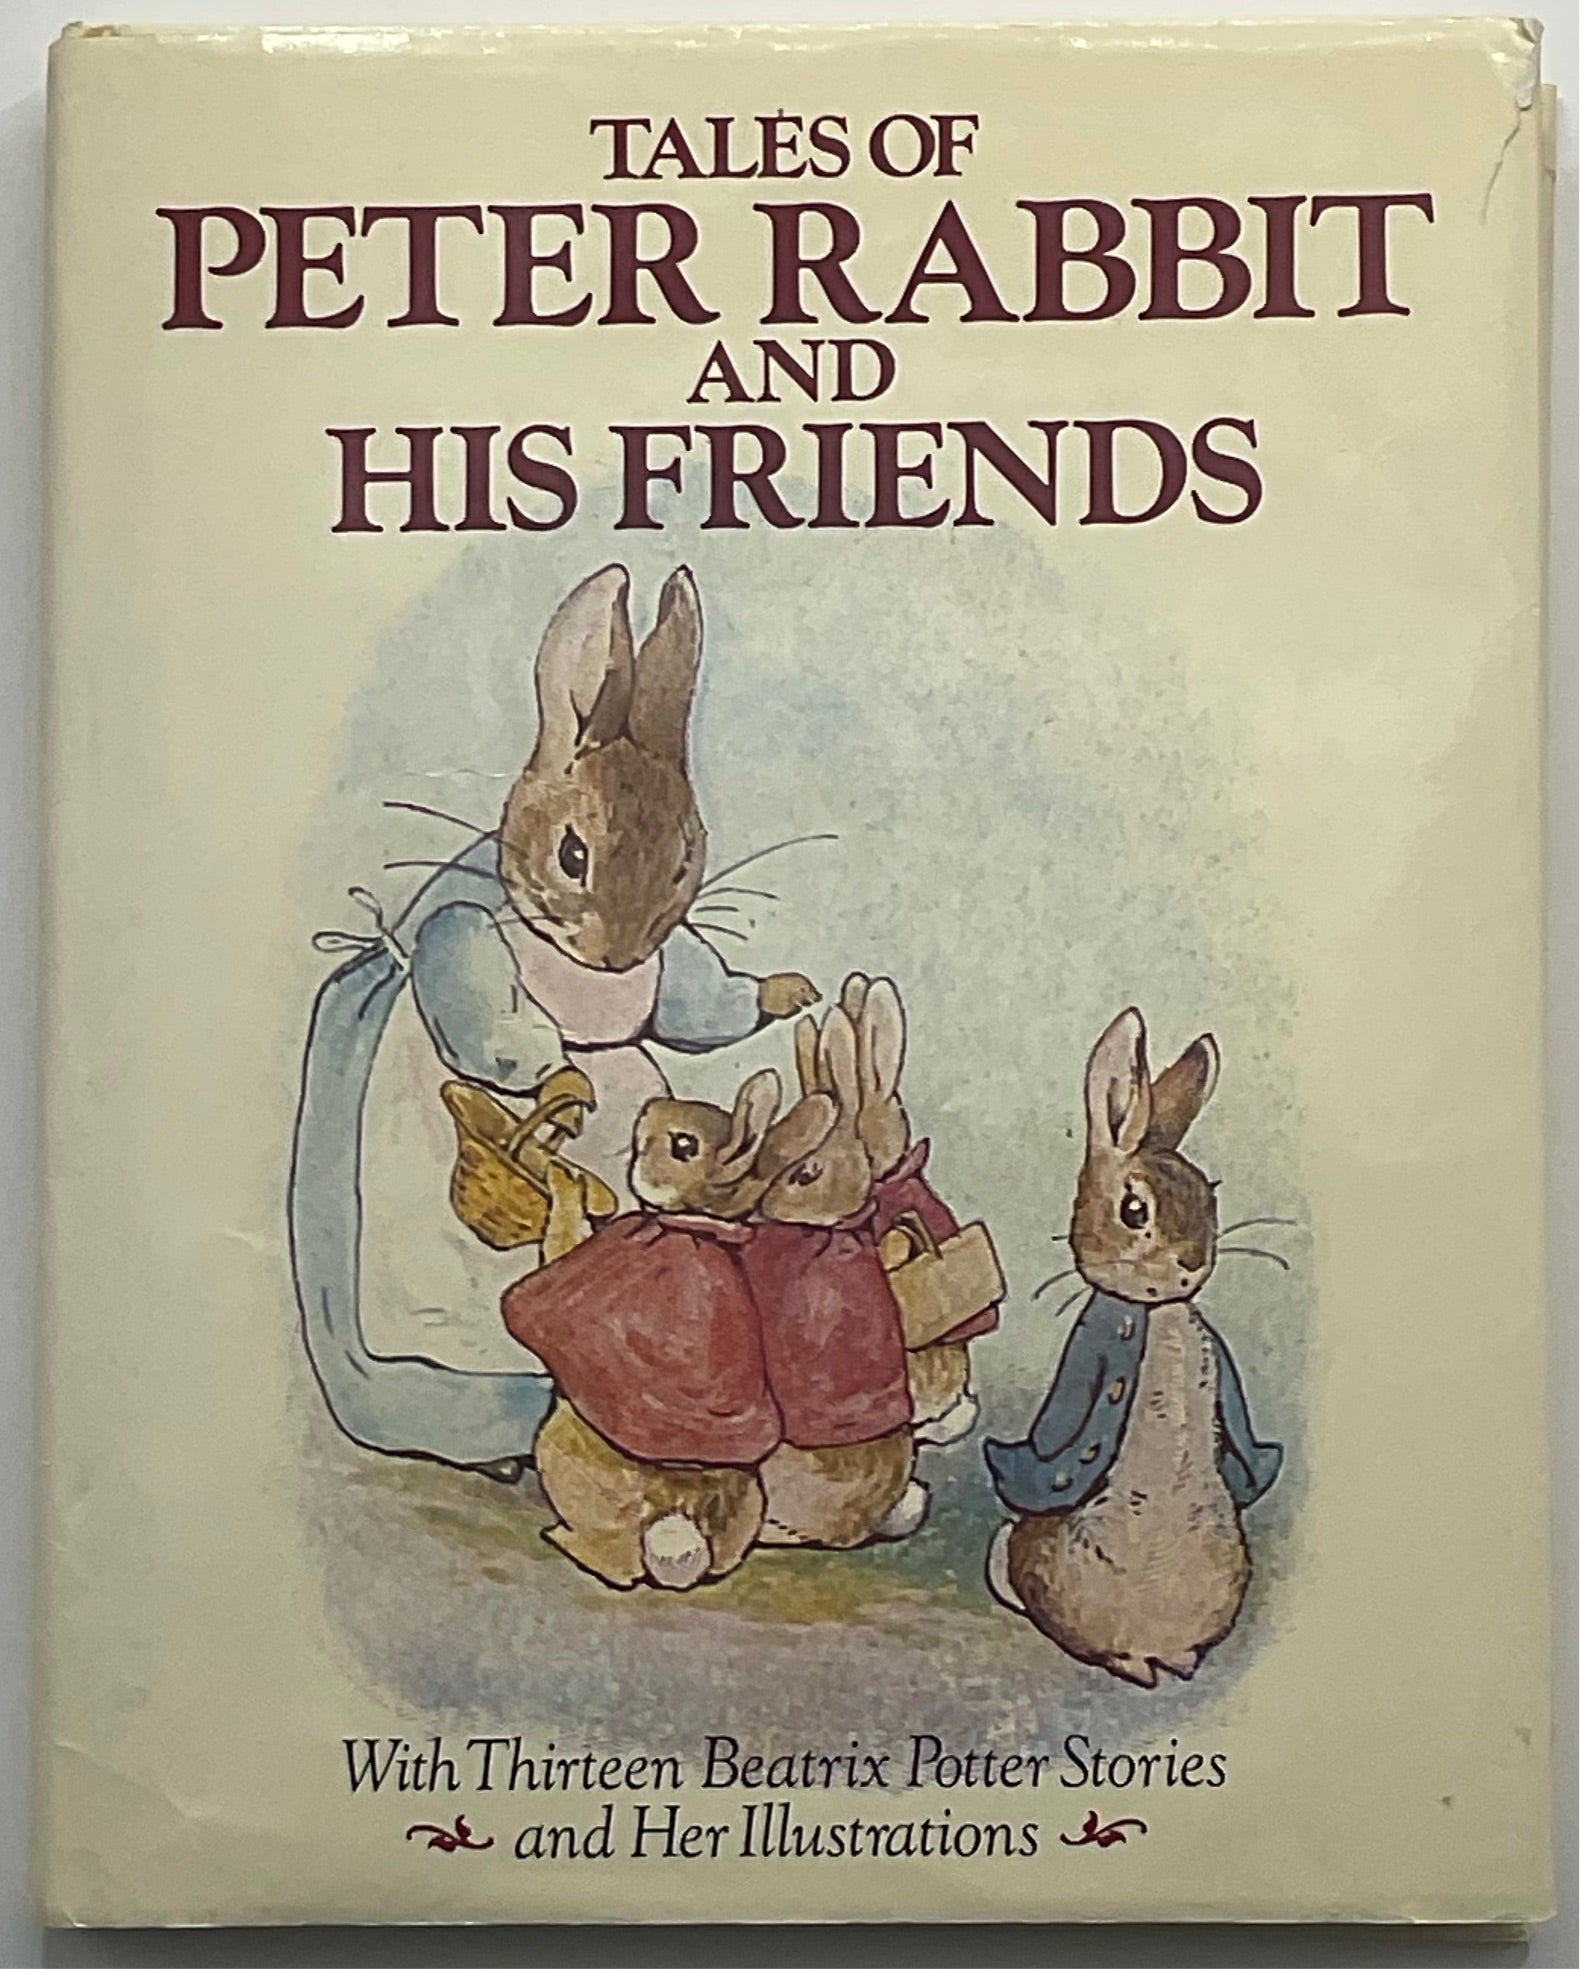 Tales of Peter Rabbit and his Friends